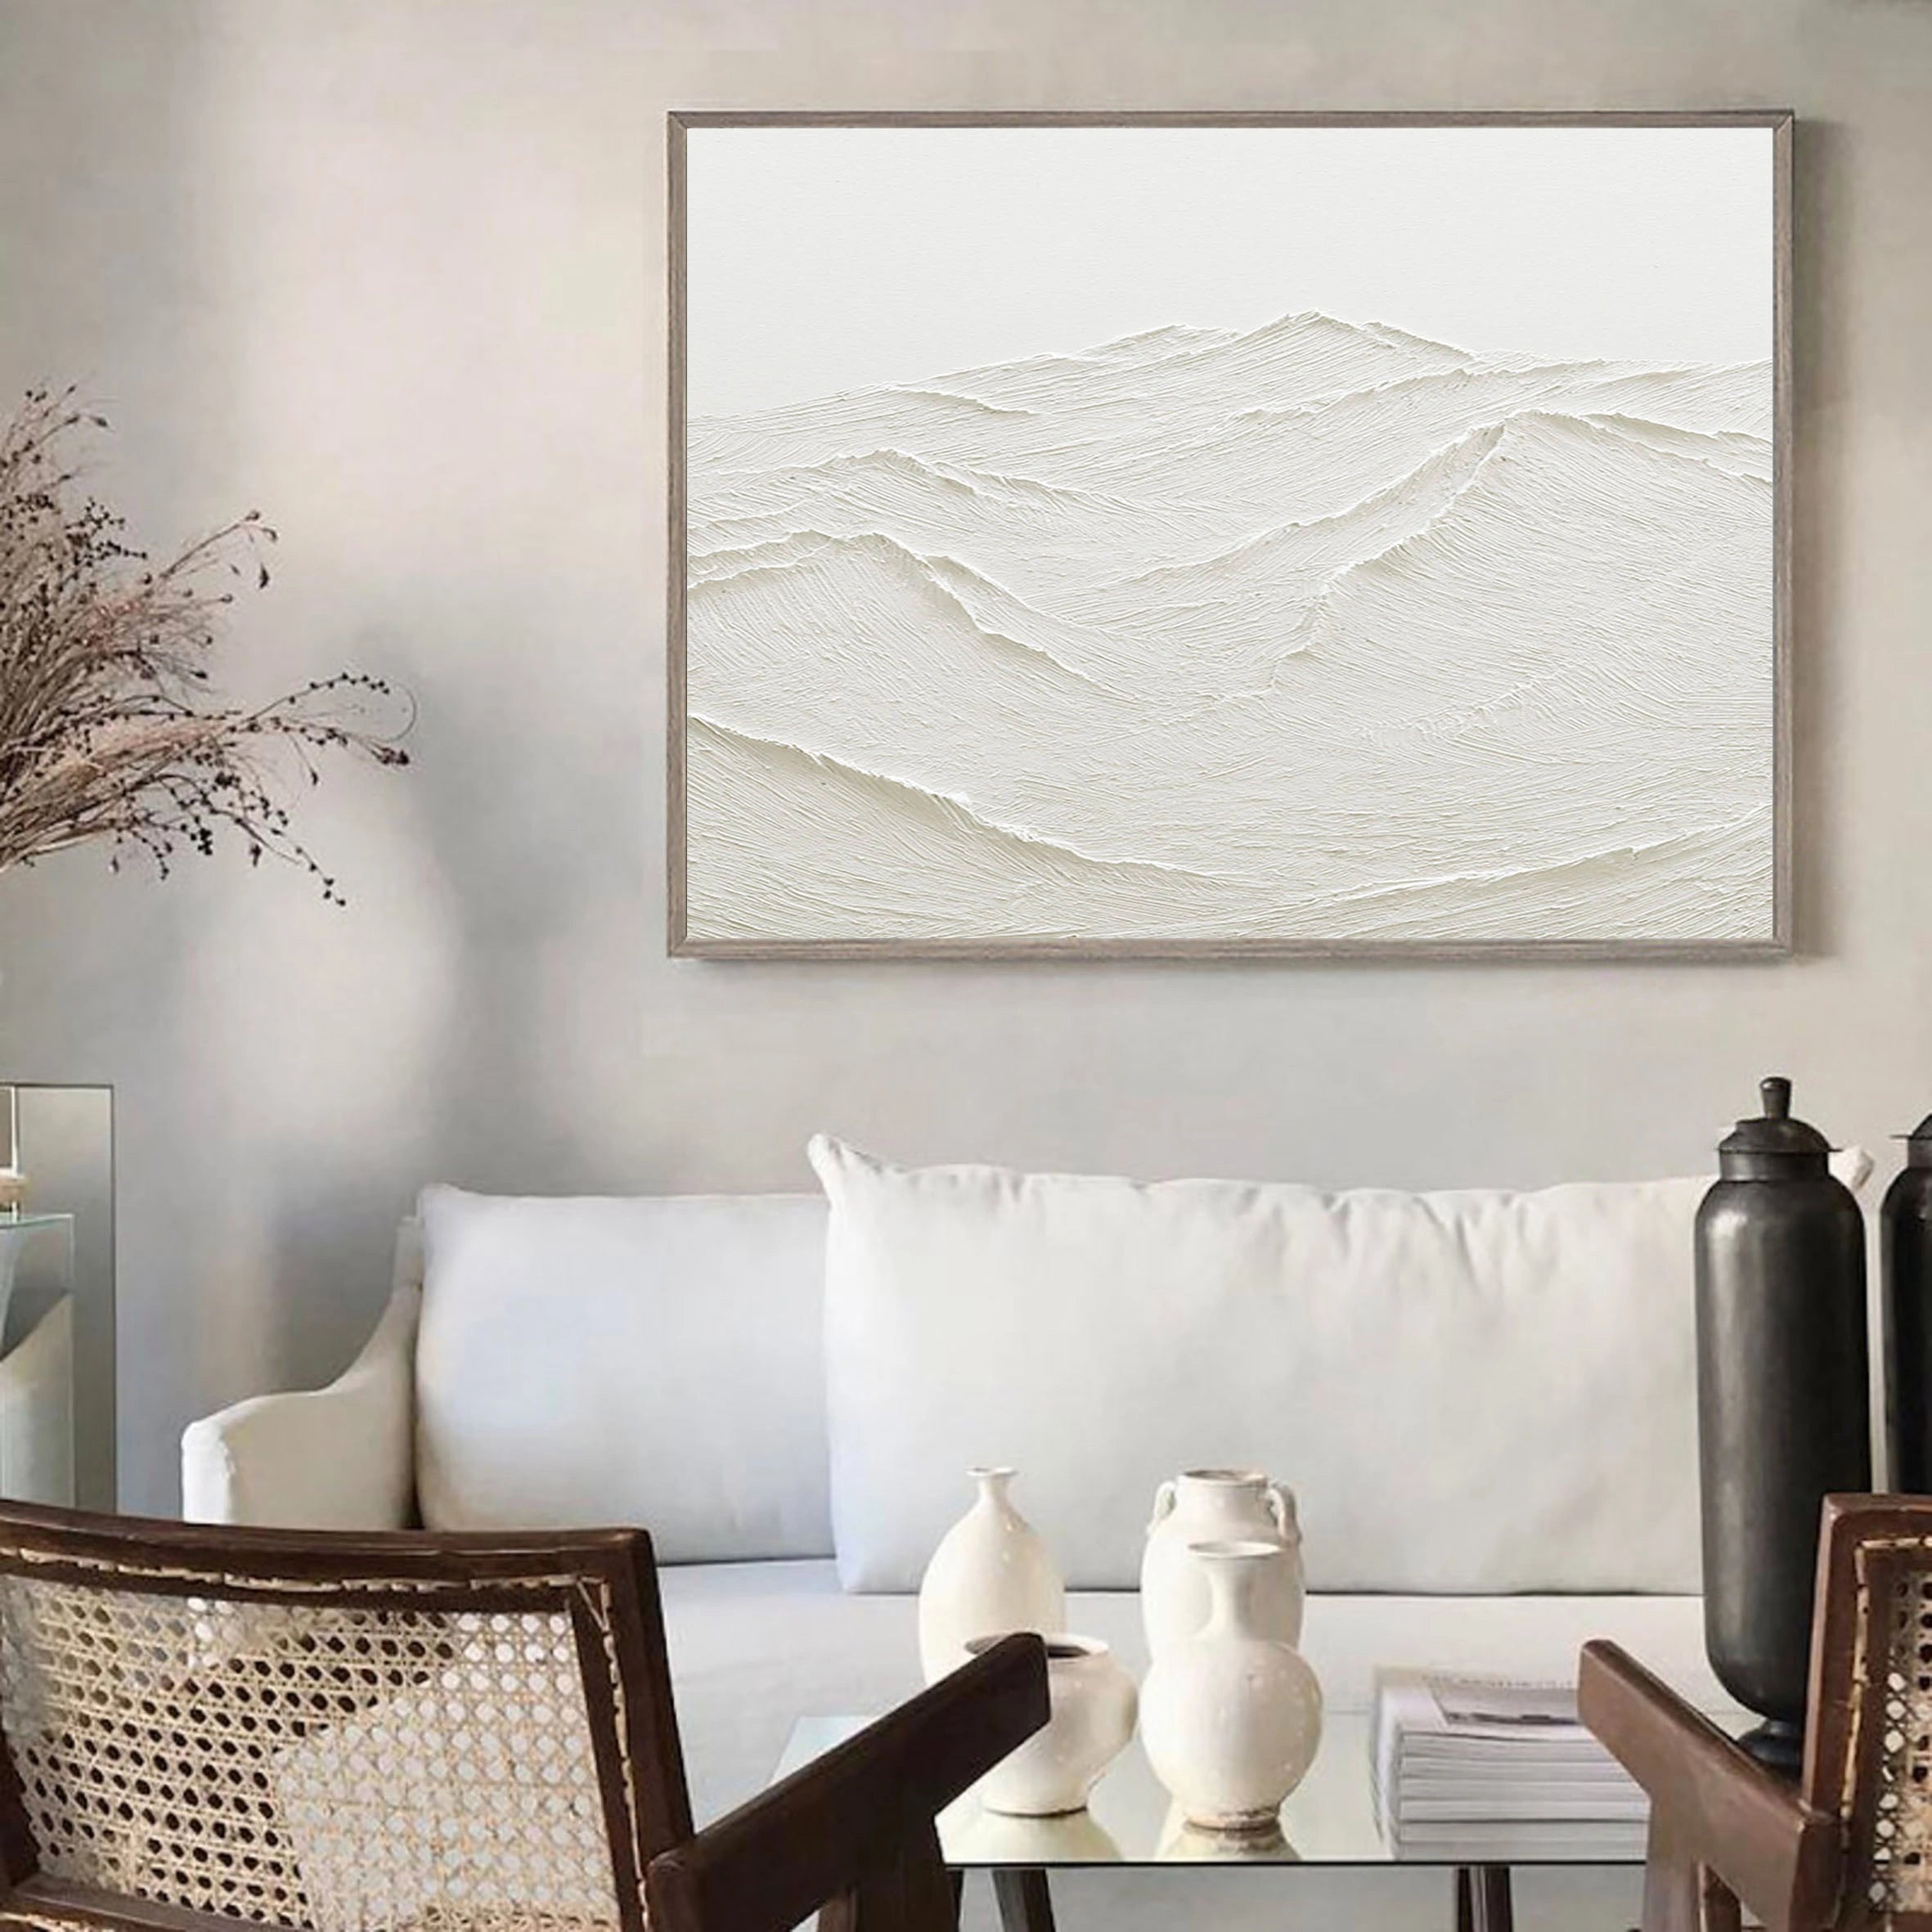 White Rich Textured Landscape Plaster Art Painting, Handcrafted Mountain Minimalist Wall Art